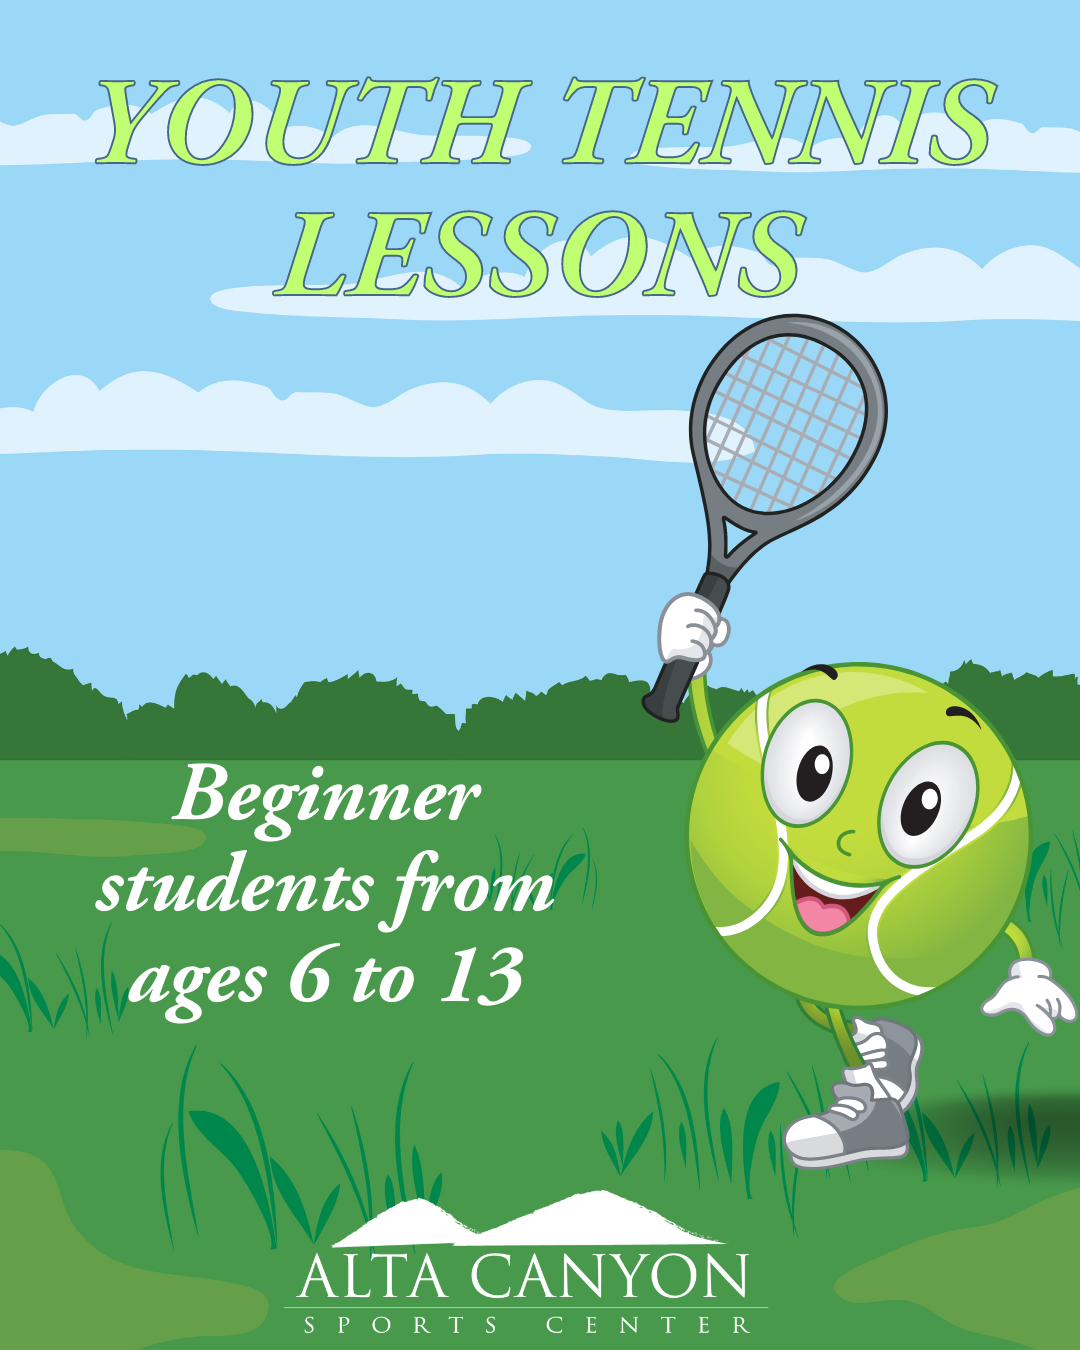 Youth Tennis Lessons, Alta Canyon Sports Center at Alta Canyon Sports Center, Sandy UT, Classes and Workshops